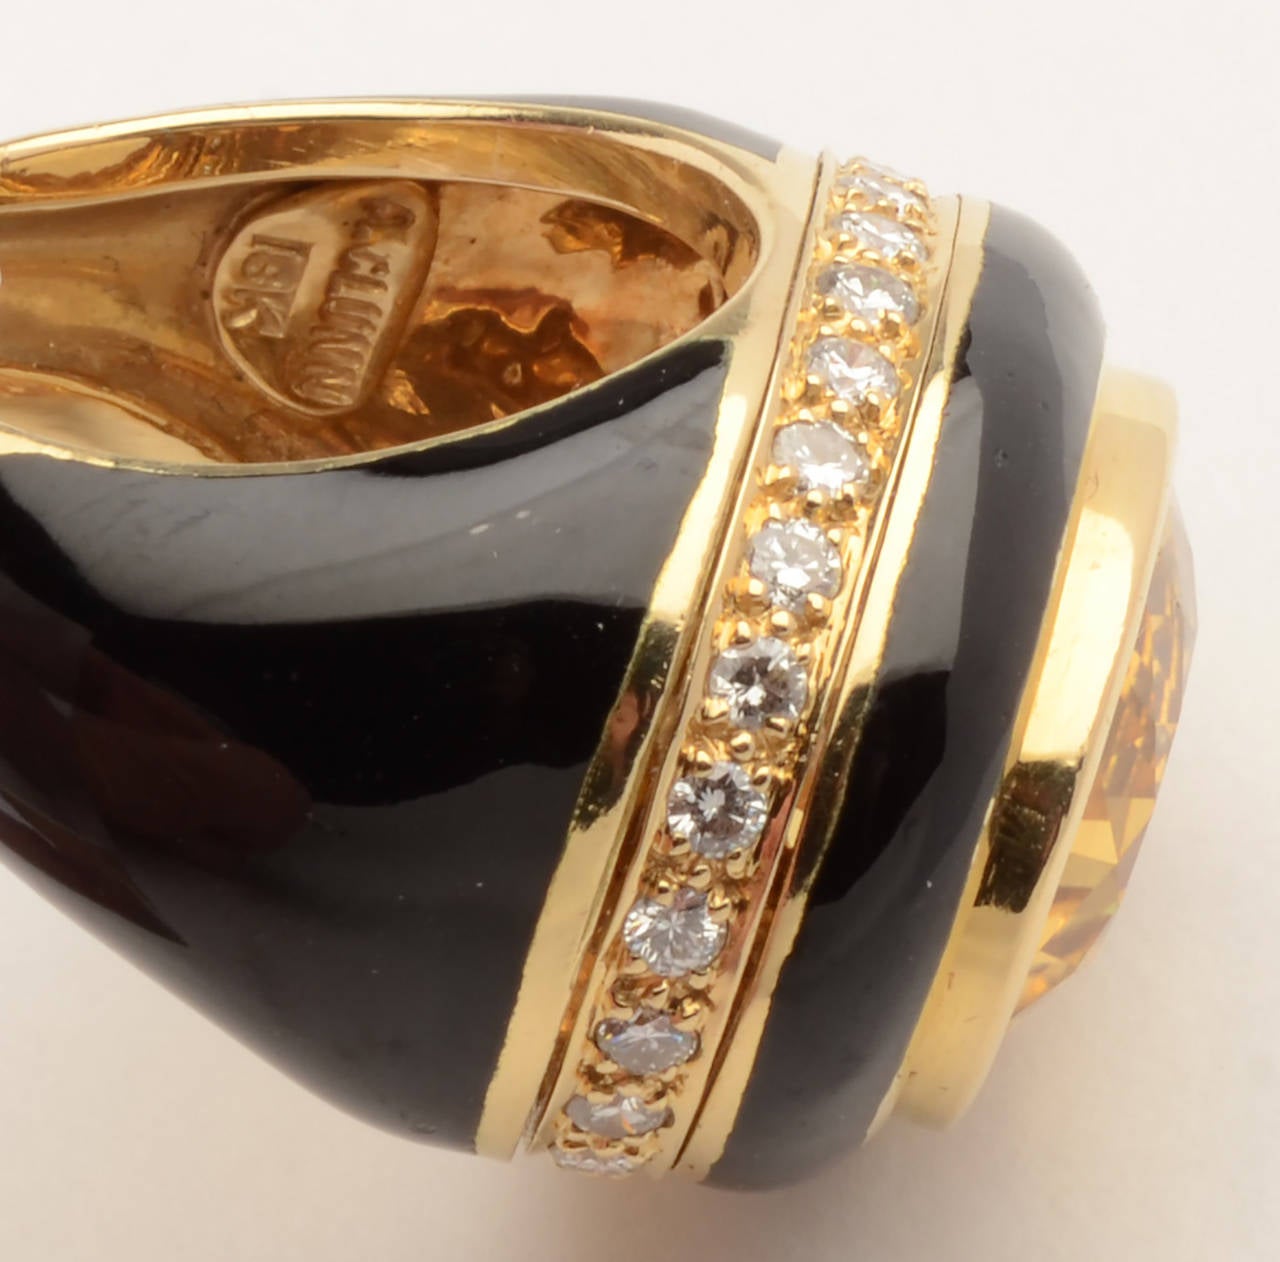 This stunning and impressive ring is by American designer, Andrew Clunn. An oval citrine is surrounded by a band of black onyx. A band of diamonds is below that with onyx below the diamonds. The citrine measures 11/16